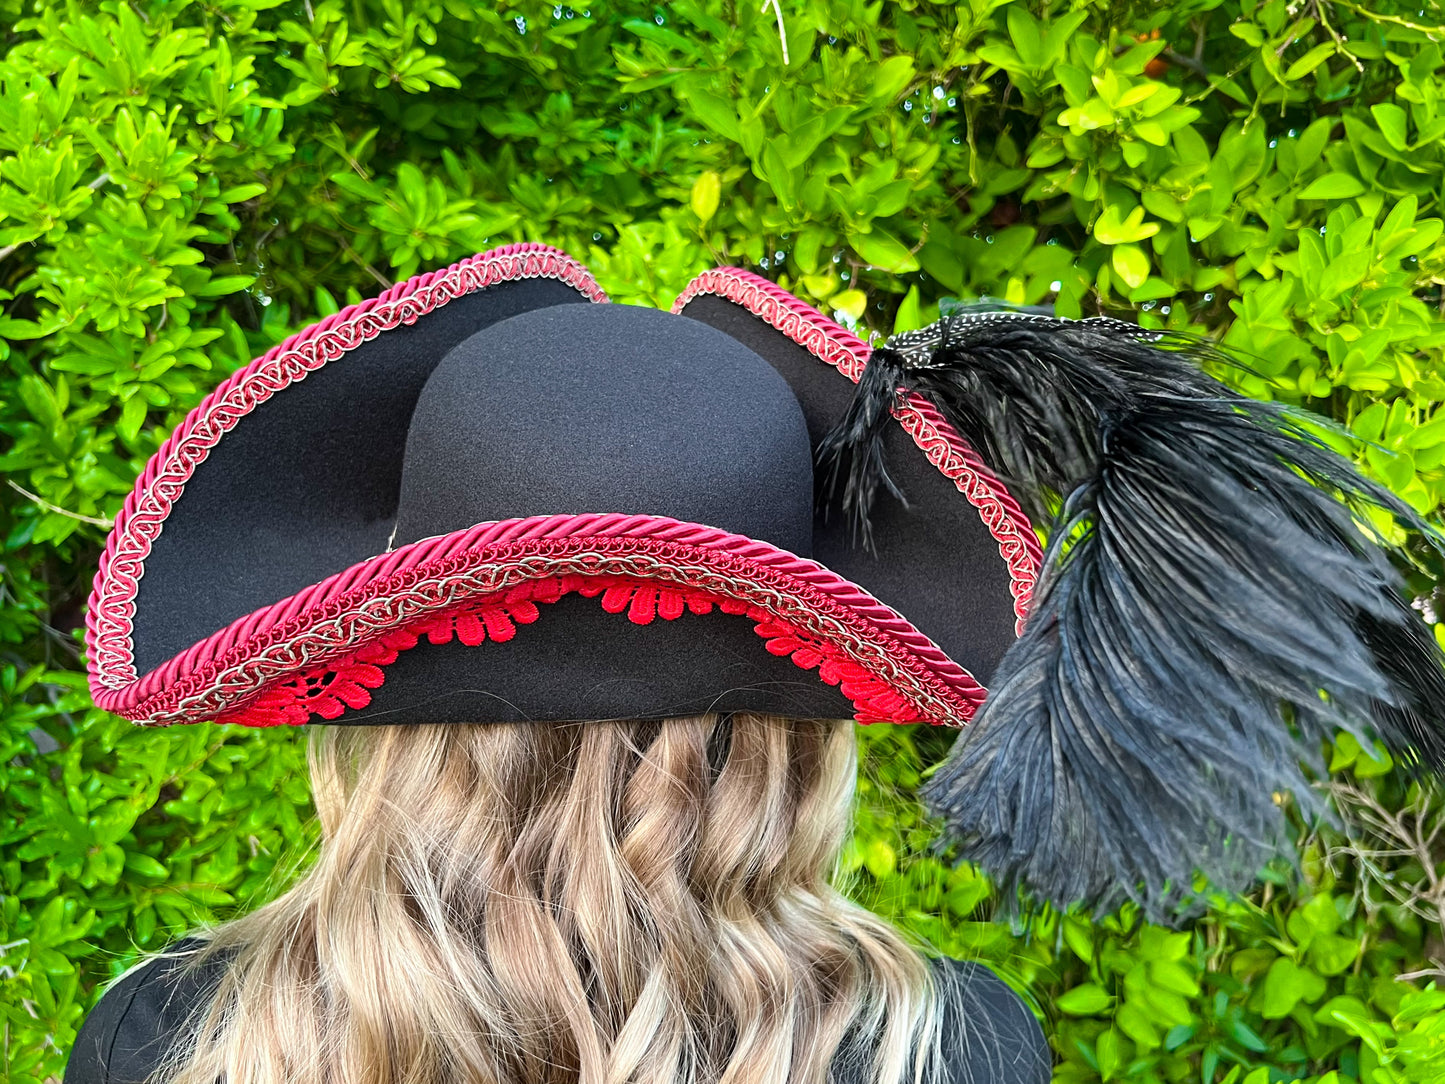 Tricorn Hat 22" Black Polyester Base with Red Trim, Feathers, and Vintage Brooch